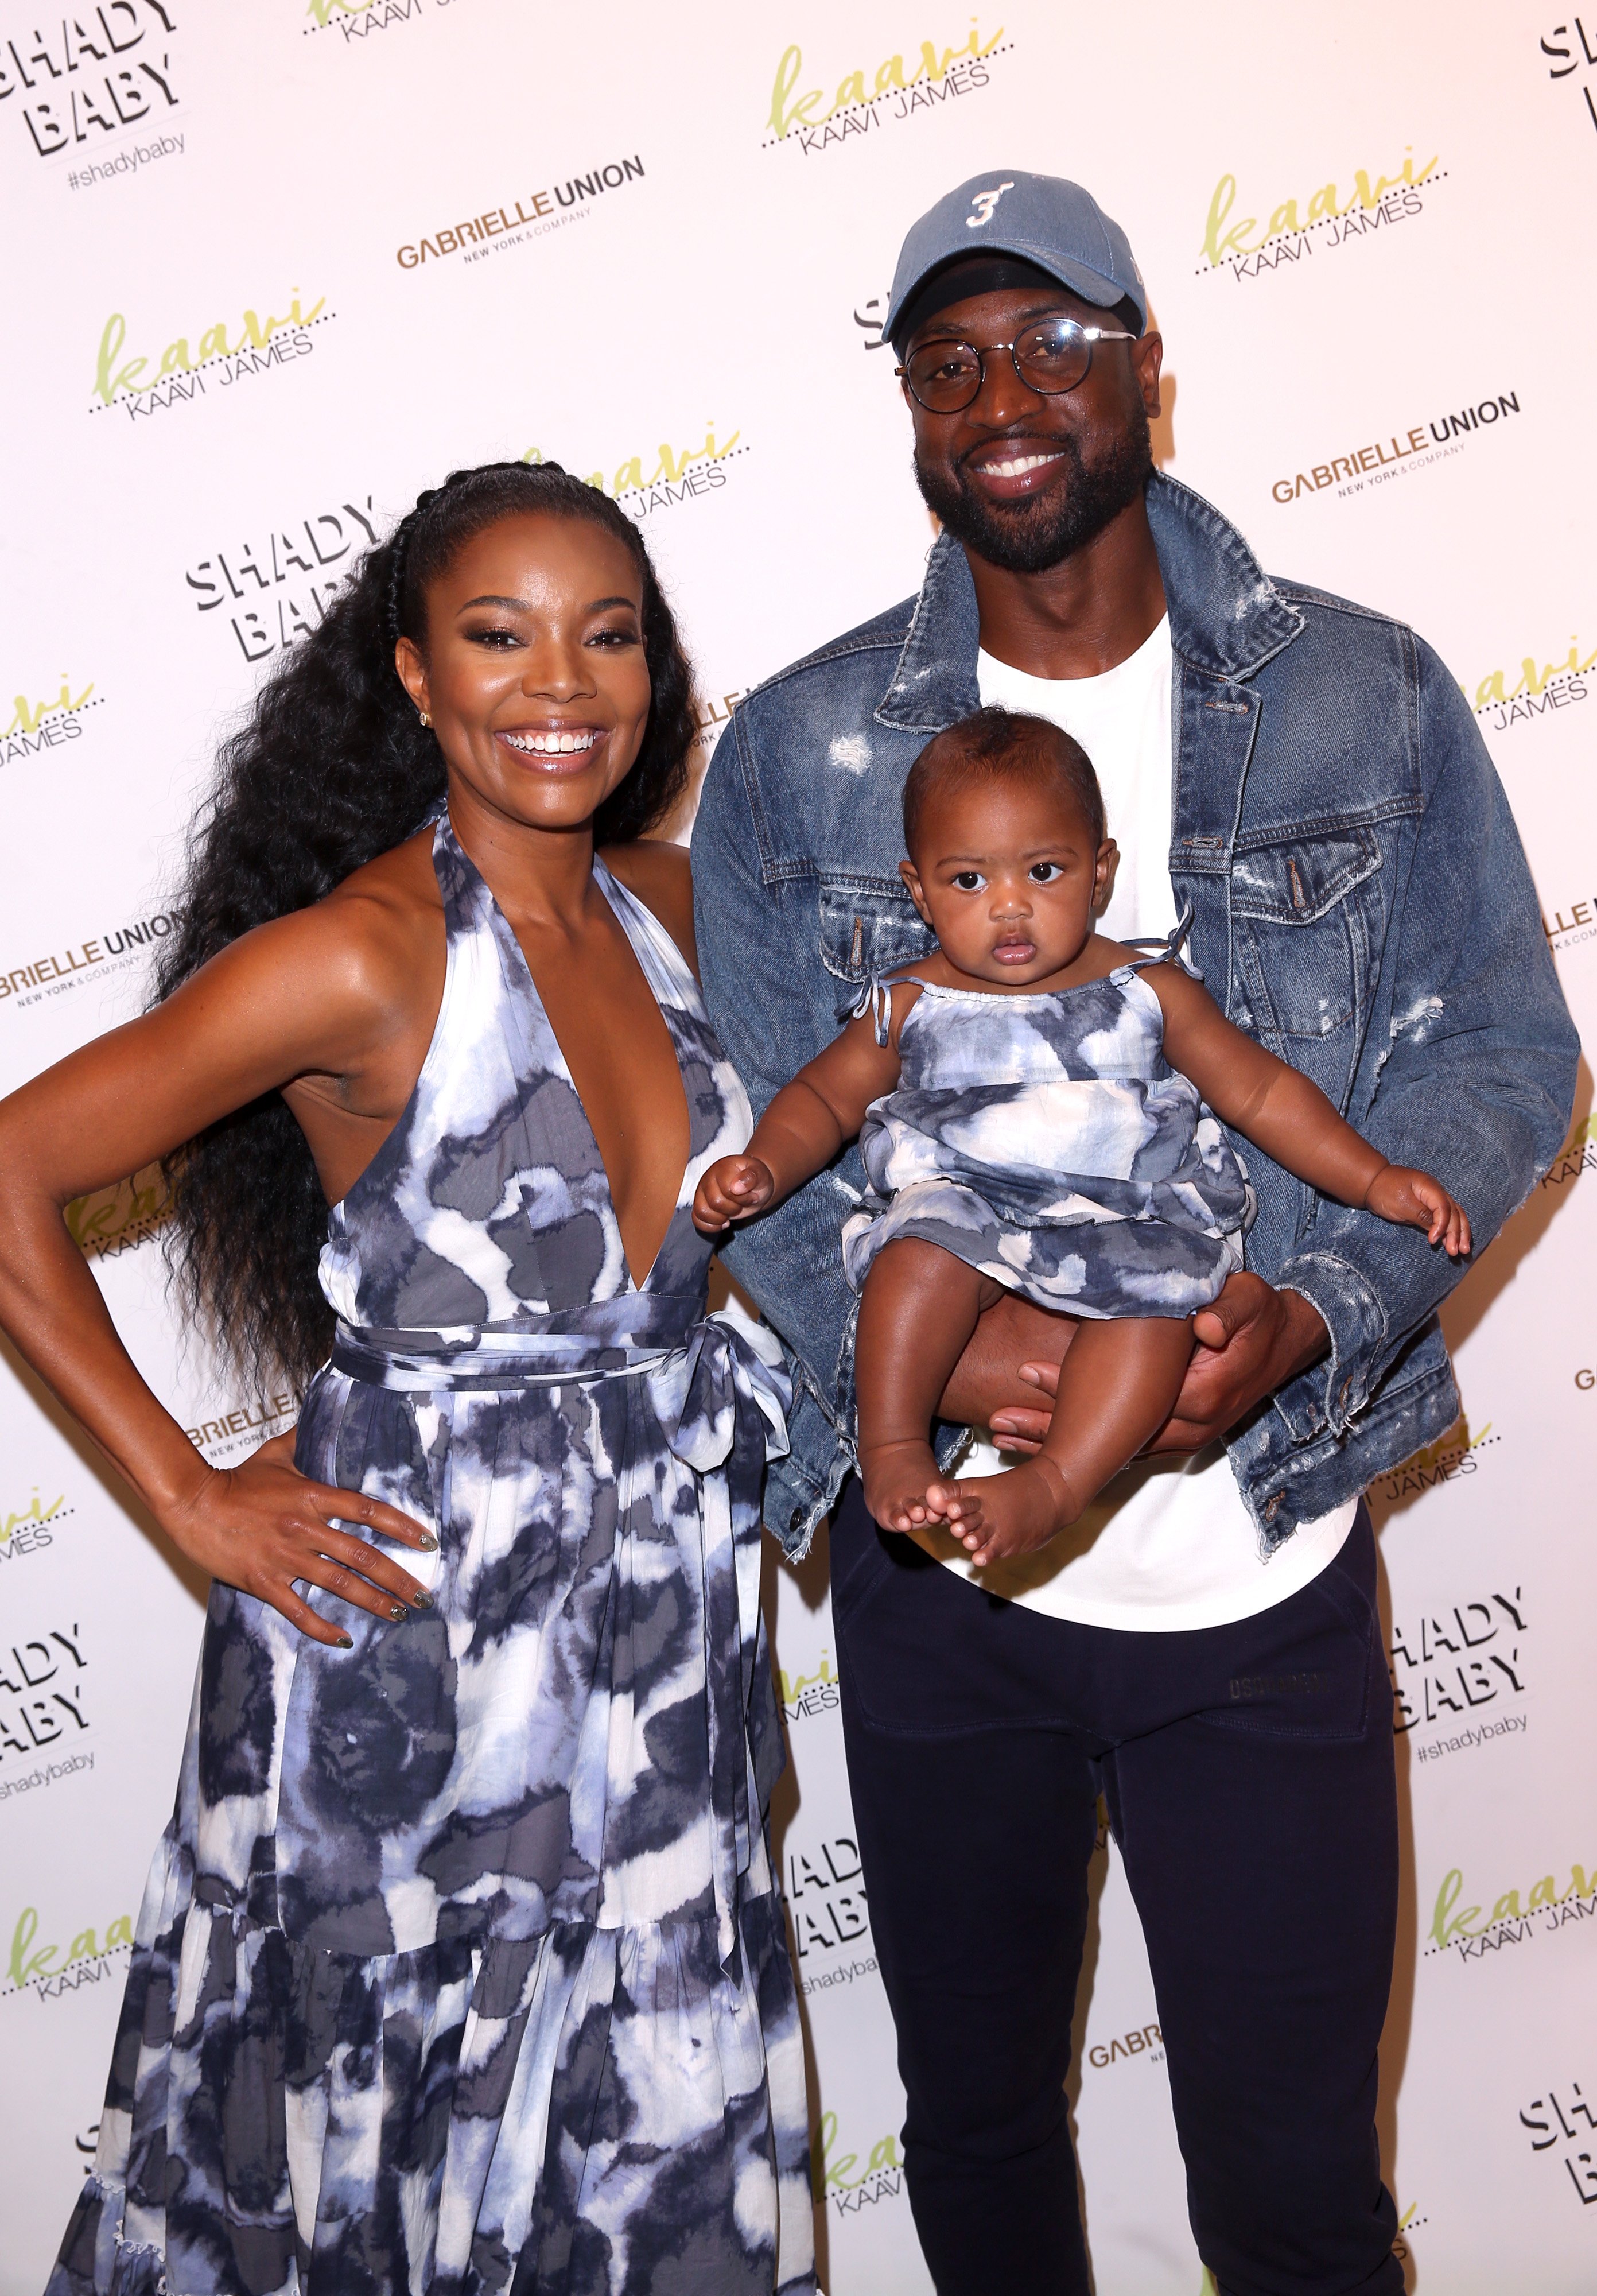 Gabrielle Union, Dwyane Wade, & Kaavia James at New York & Company in California on May 09, 2019 | Photo: Getty Images